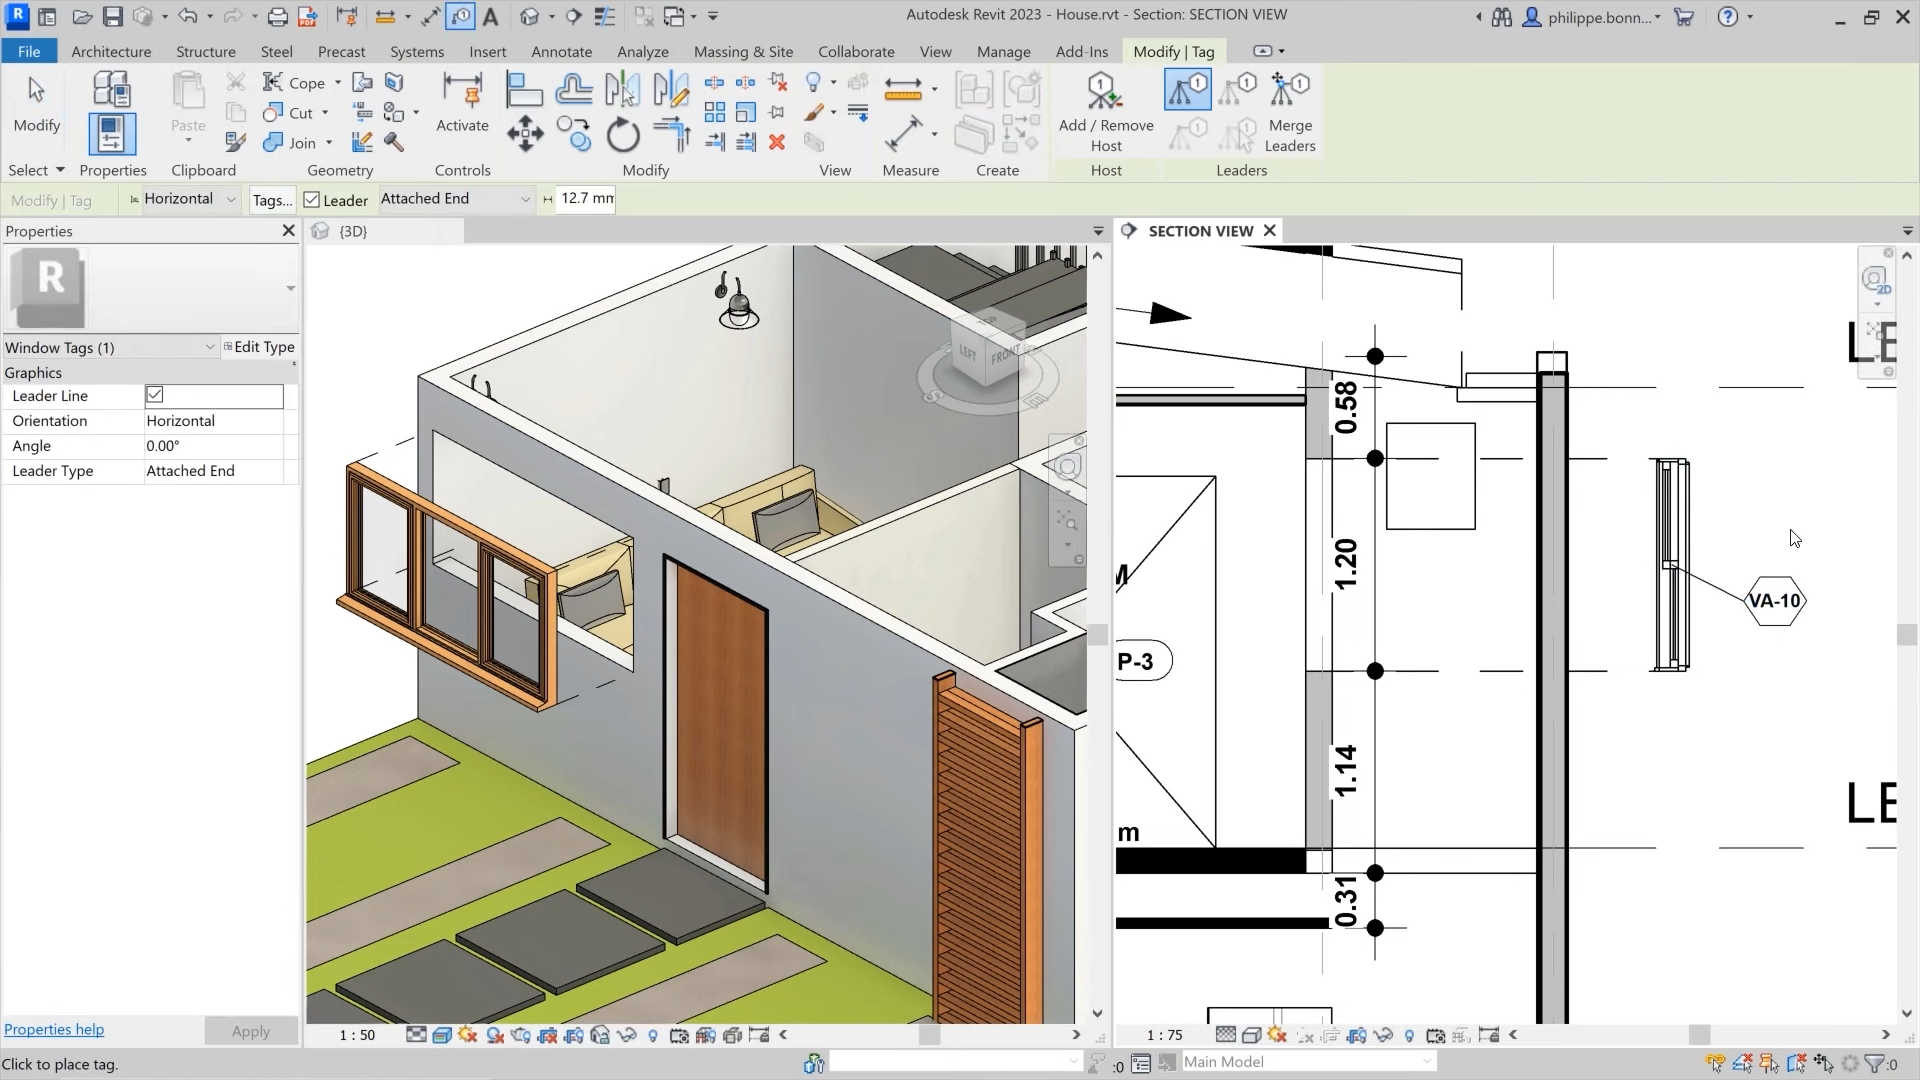 Working with Autodesk Revit 2023.1.1.1 full license